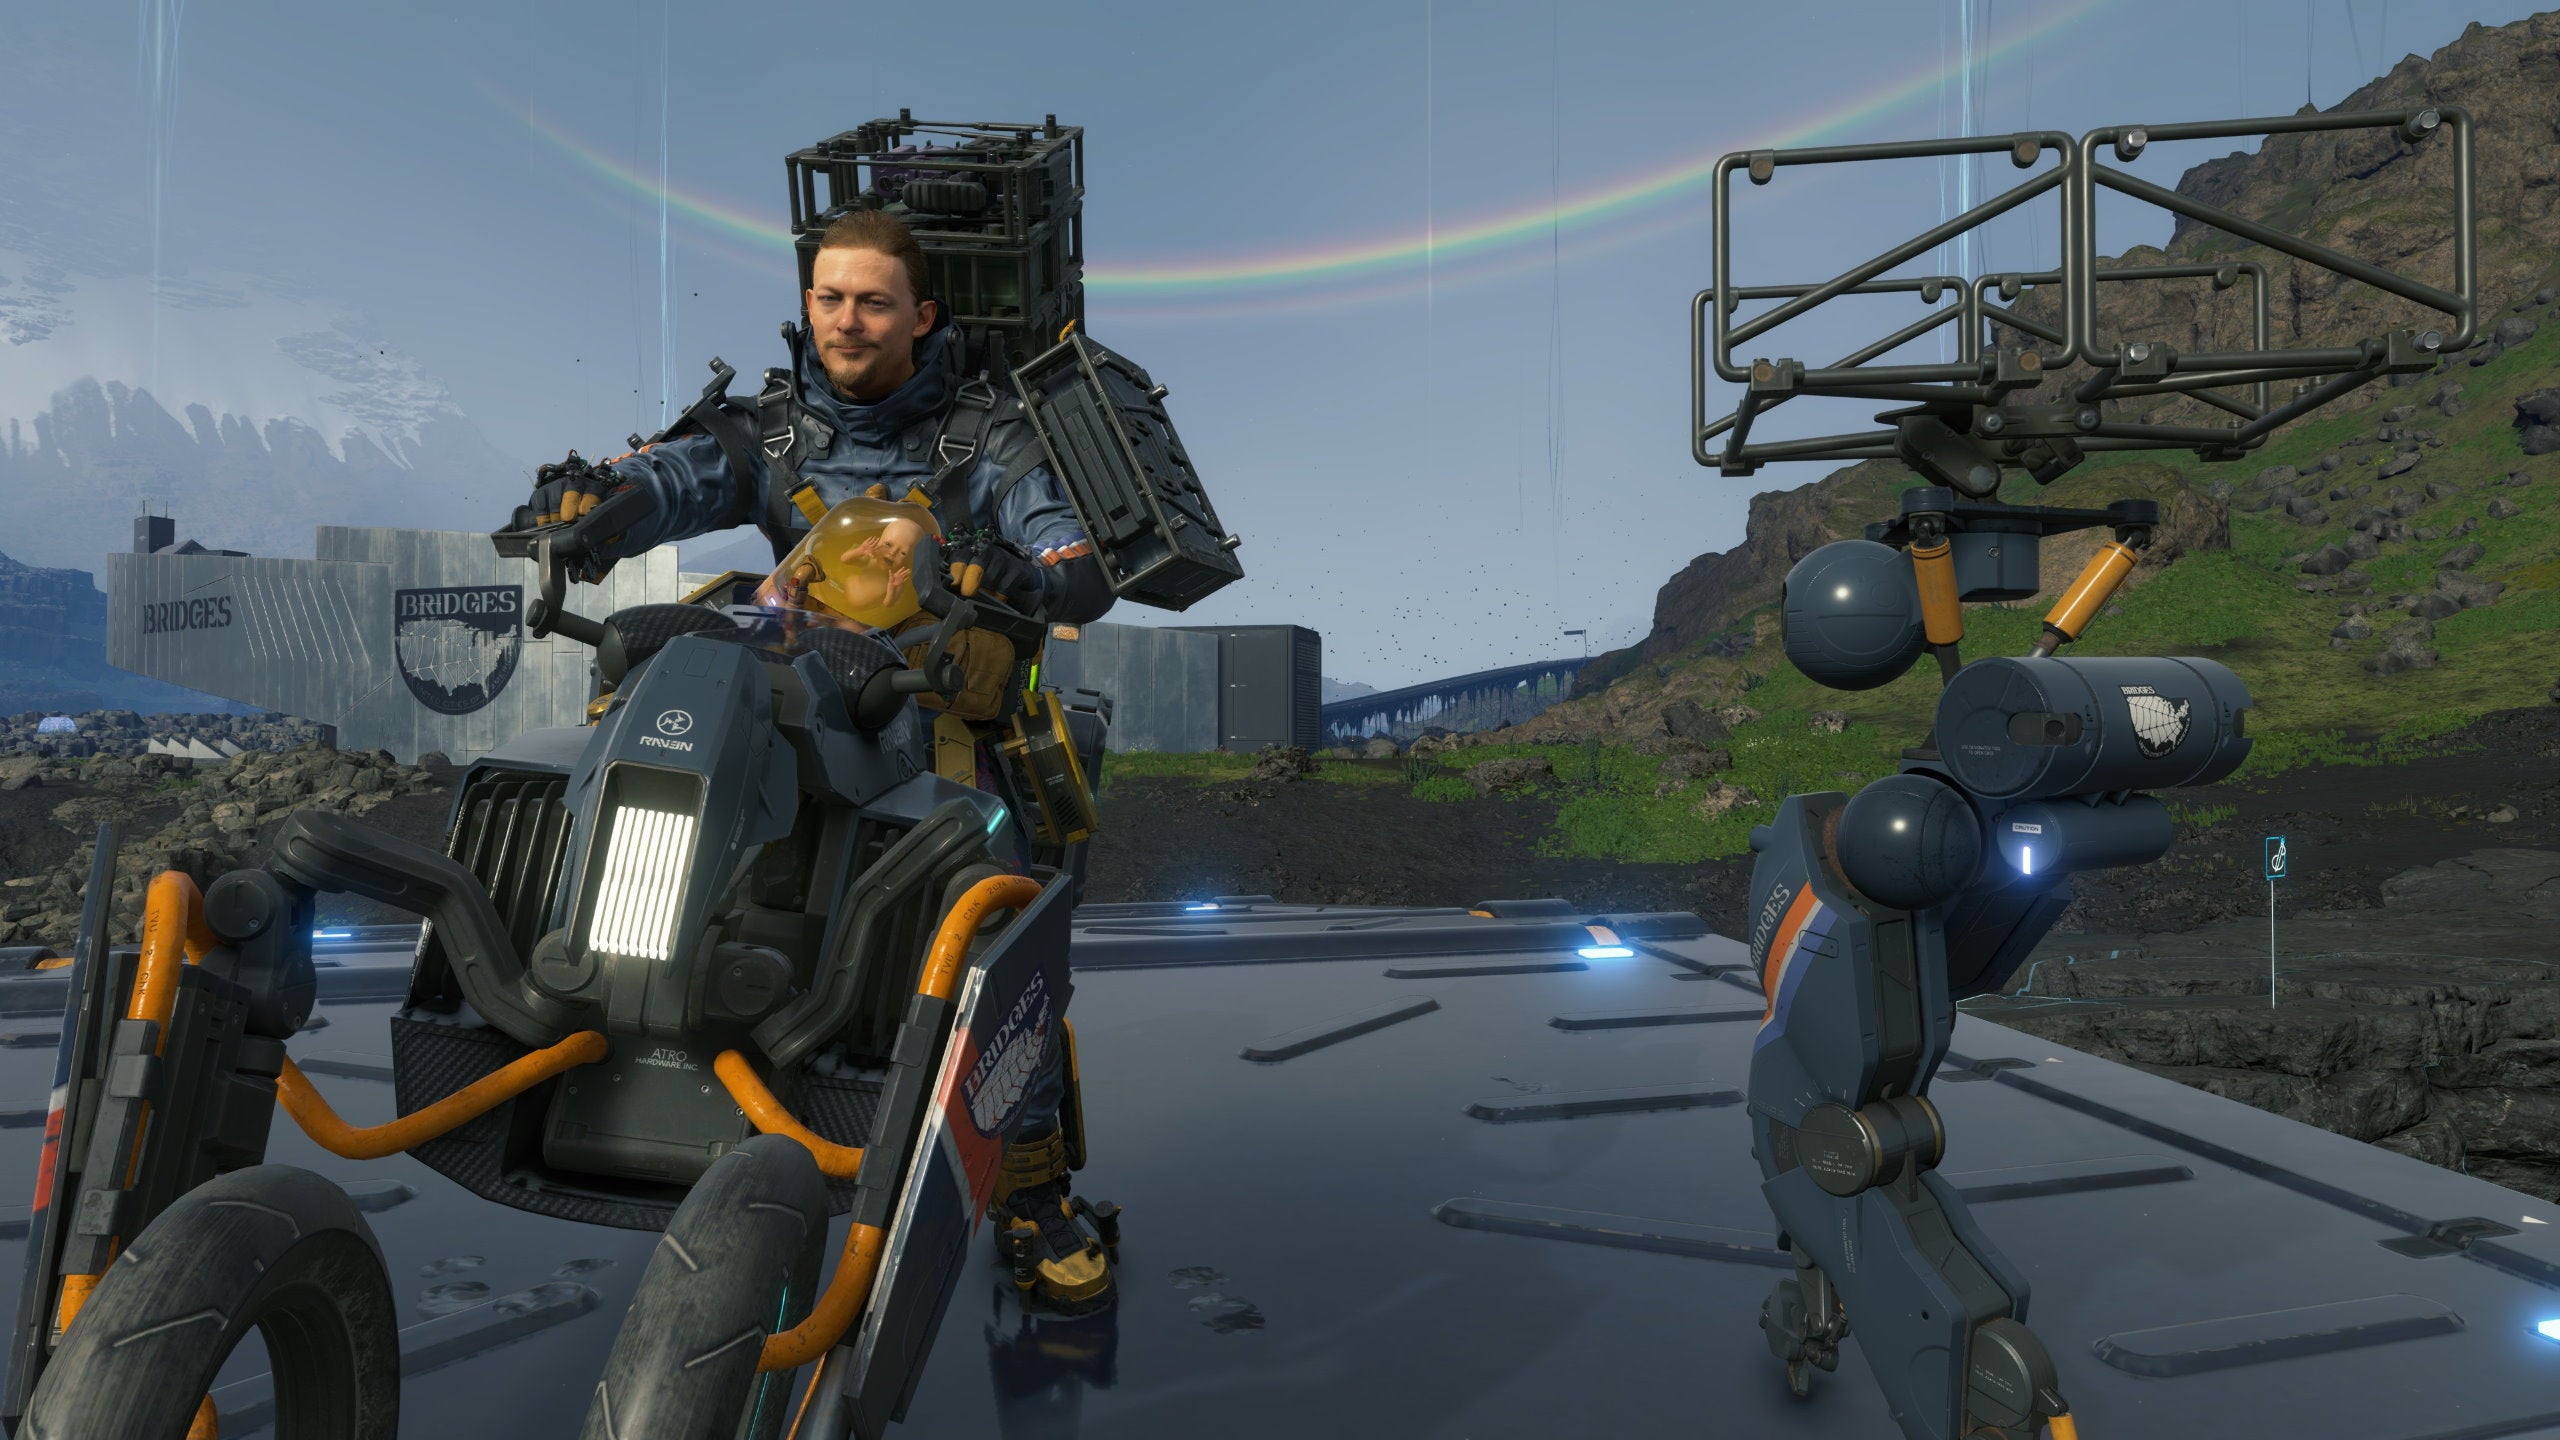 Sam rides a bike with a buddy bot in tow in Death Stranding Director's Cut